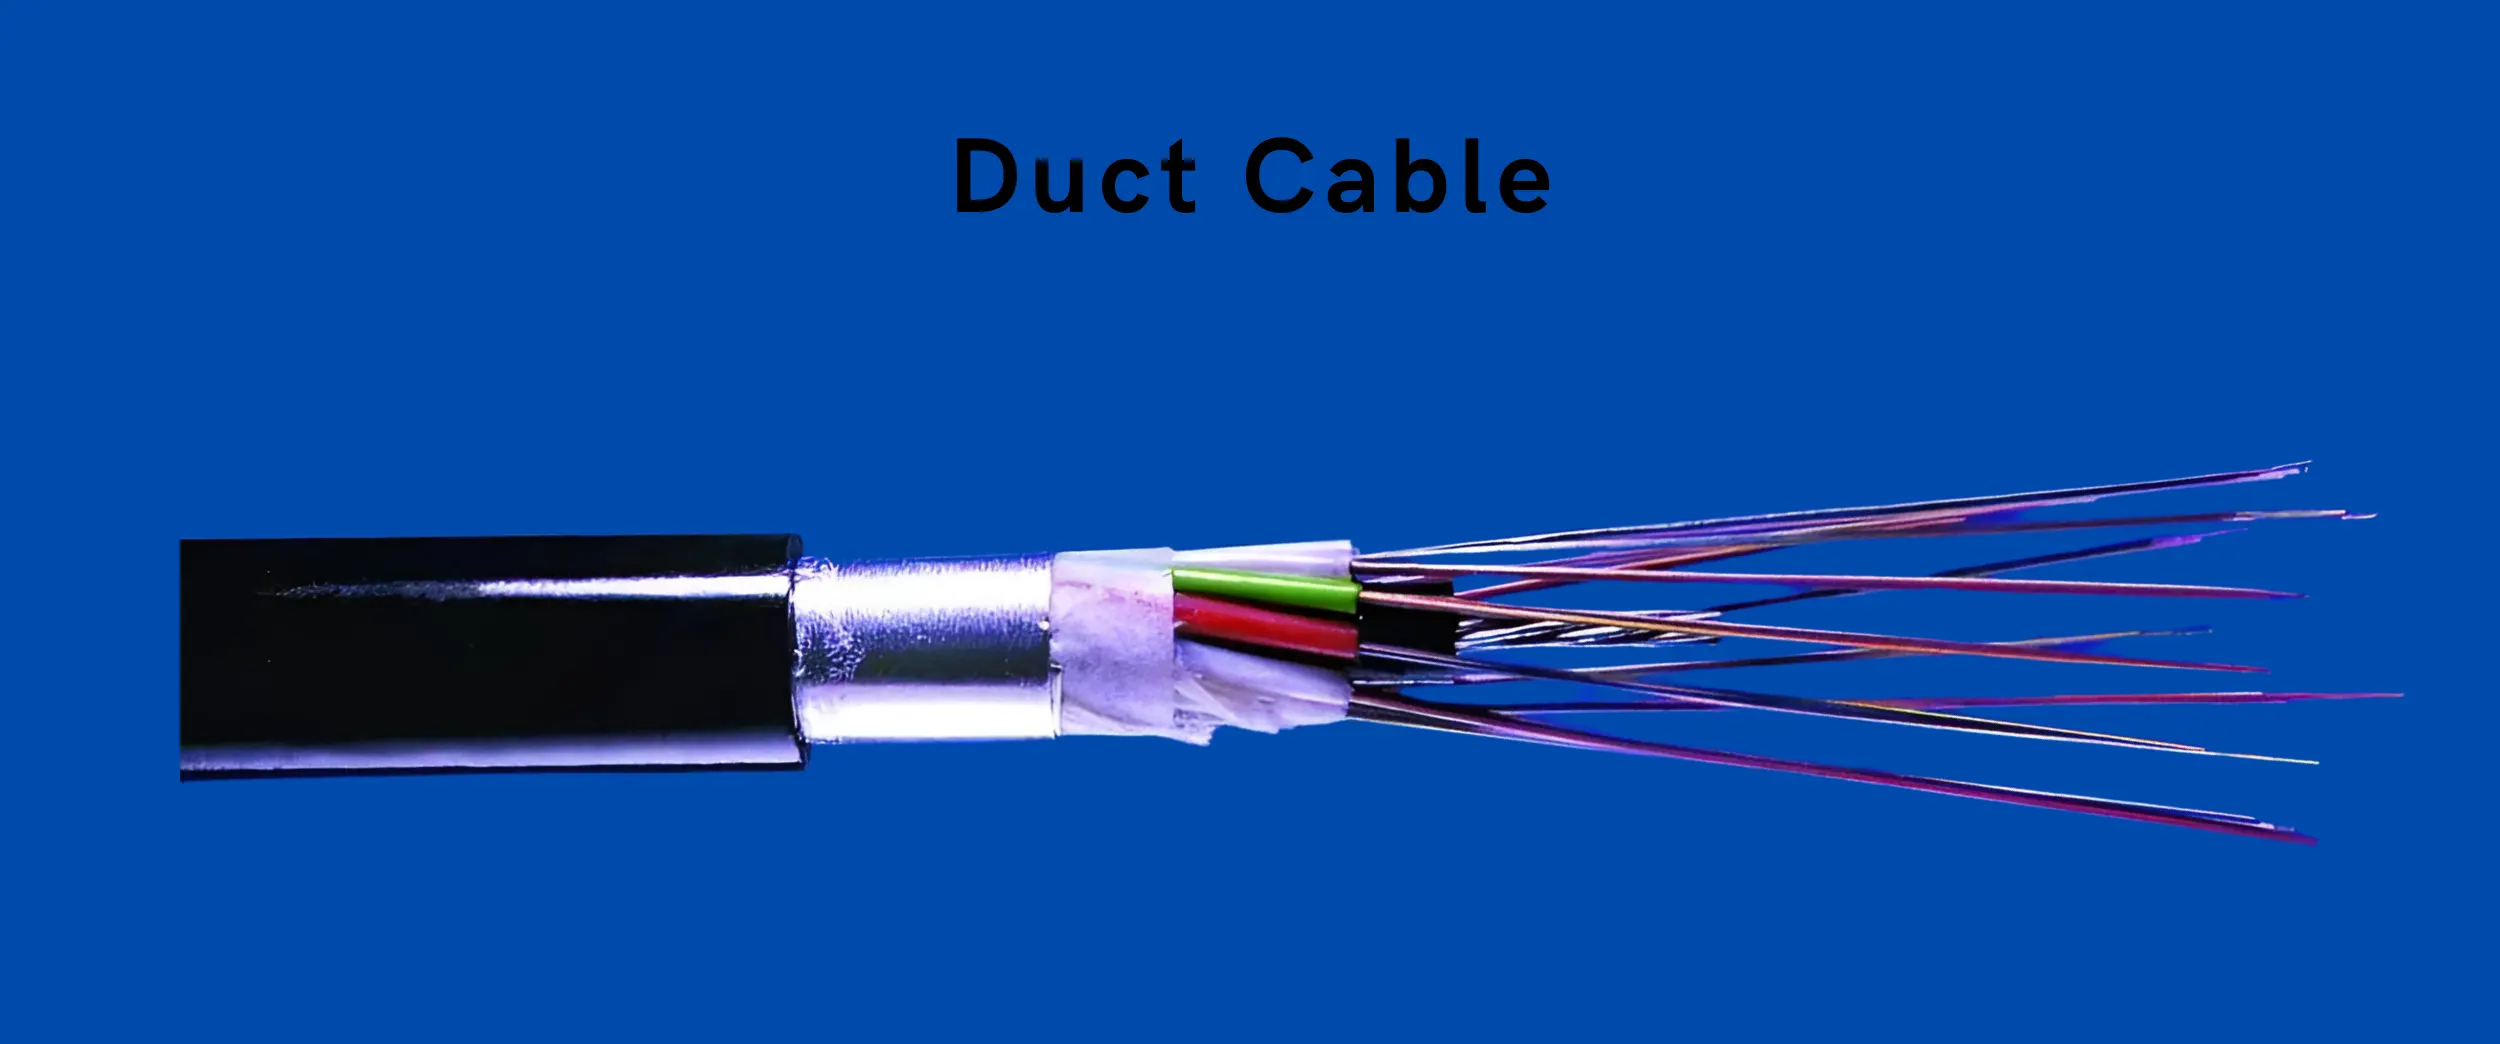 Fiber optic duct cable